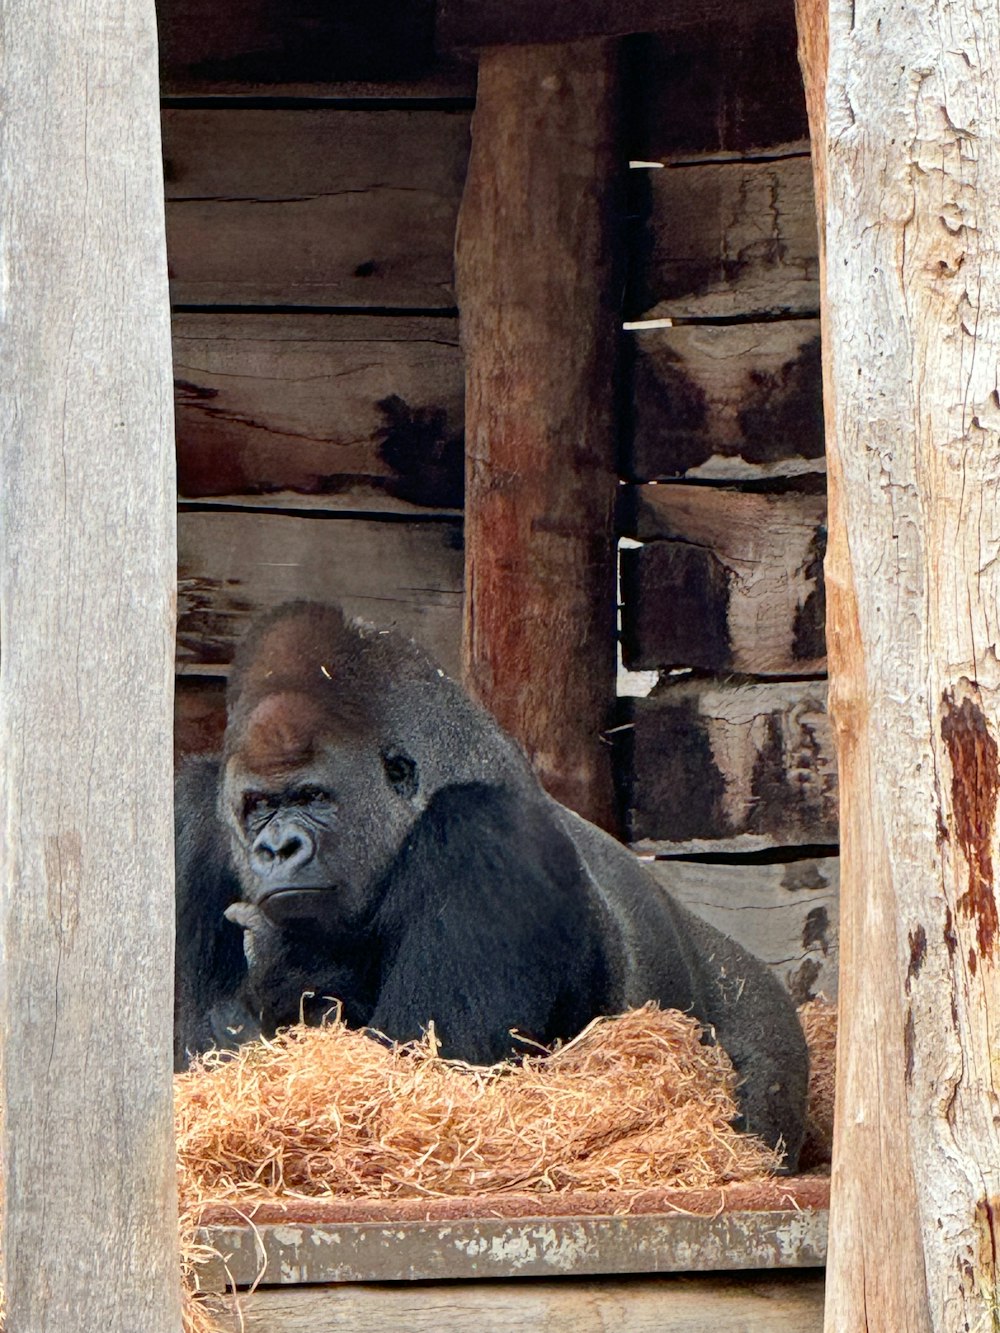 a gorilla sitting in a pile of hay